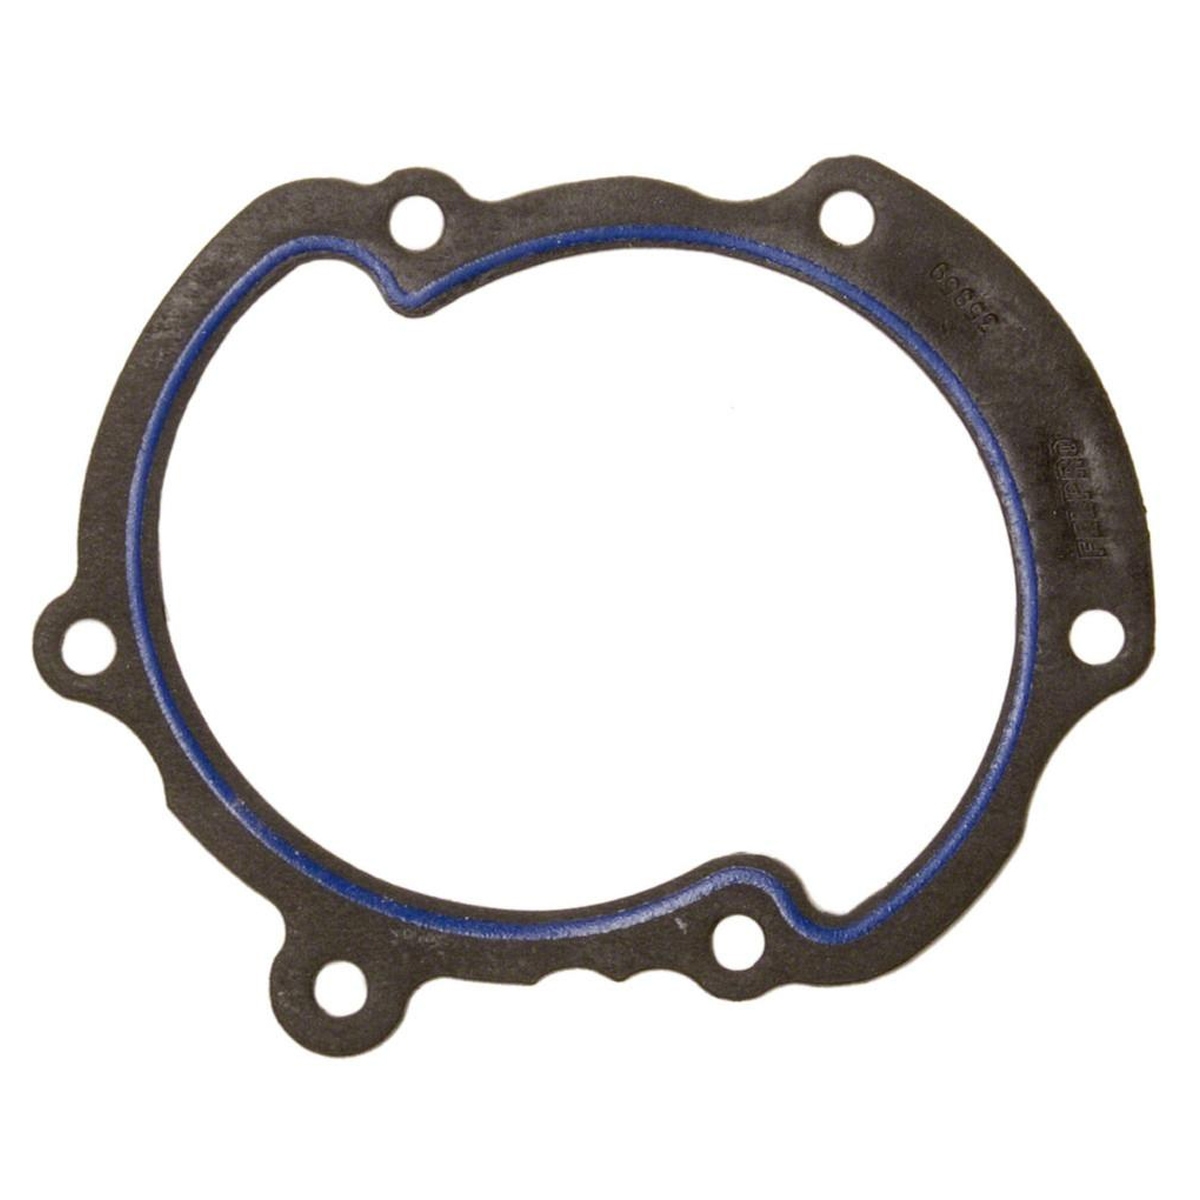 VAUXHALL AND OPEL SINTRA Water Pump Gasket